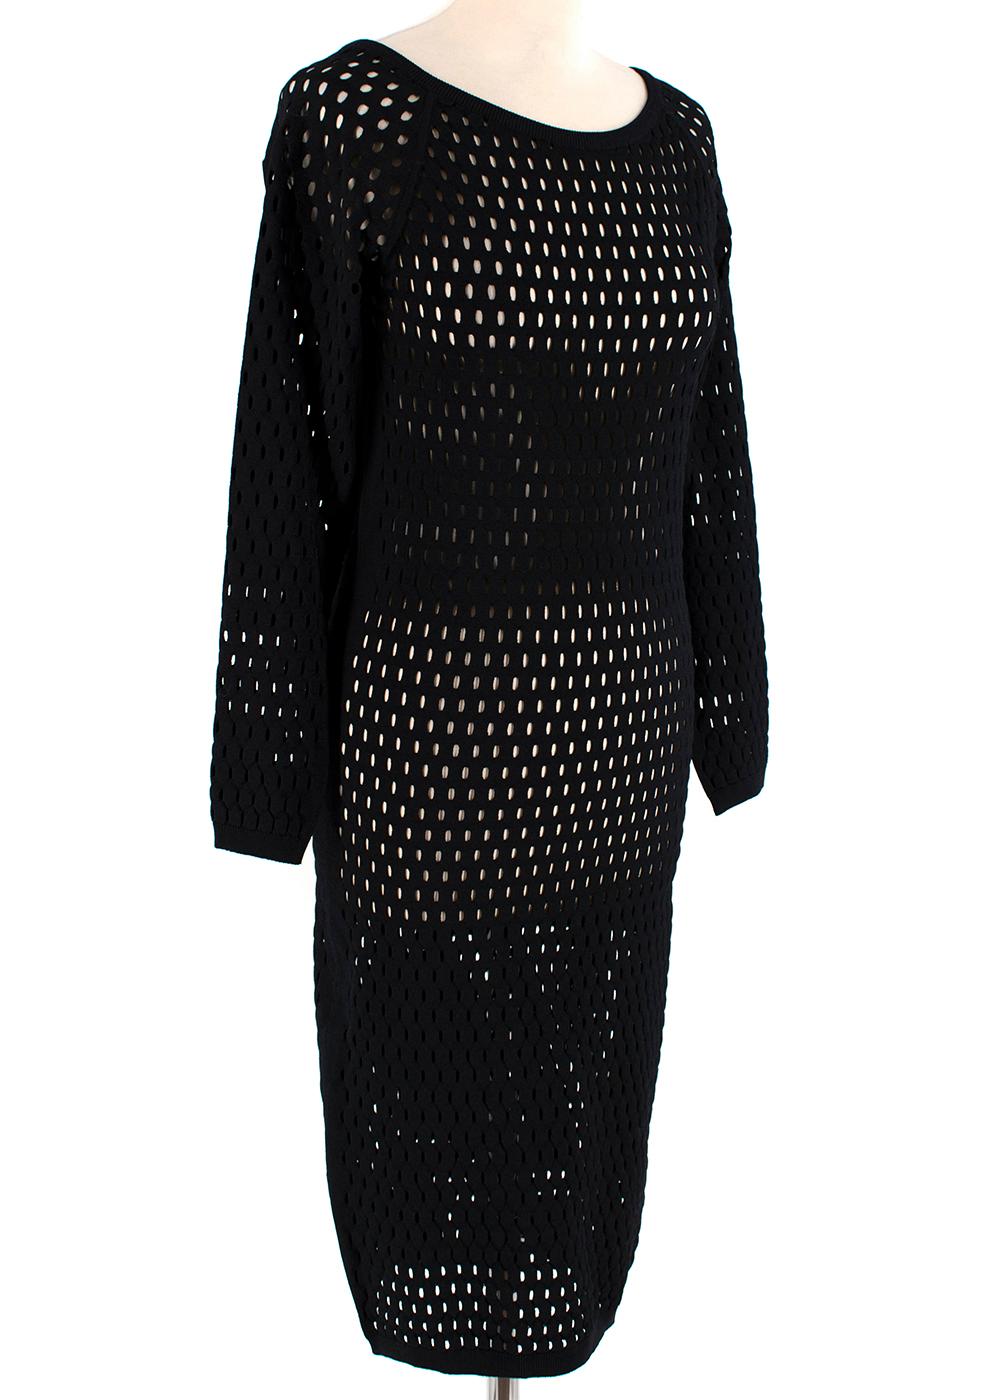 Tom Ford Black Fishnet Long Sleeve Dress

- Fish net mesh design
- Wide neckline
- Long sleeves
- Straight cut design
- Below the knee length
- This item may need a skin layer of clothing as it has a hole design
- Mid weight material

Fabric